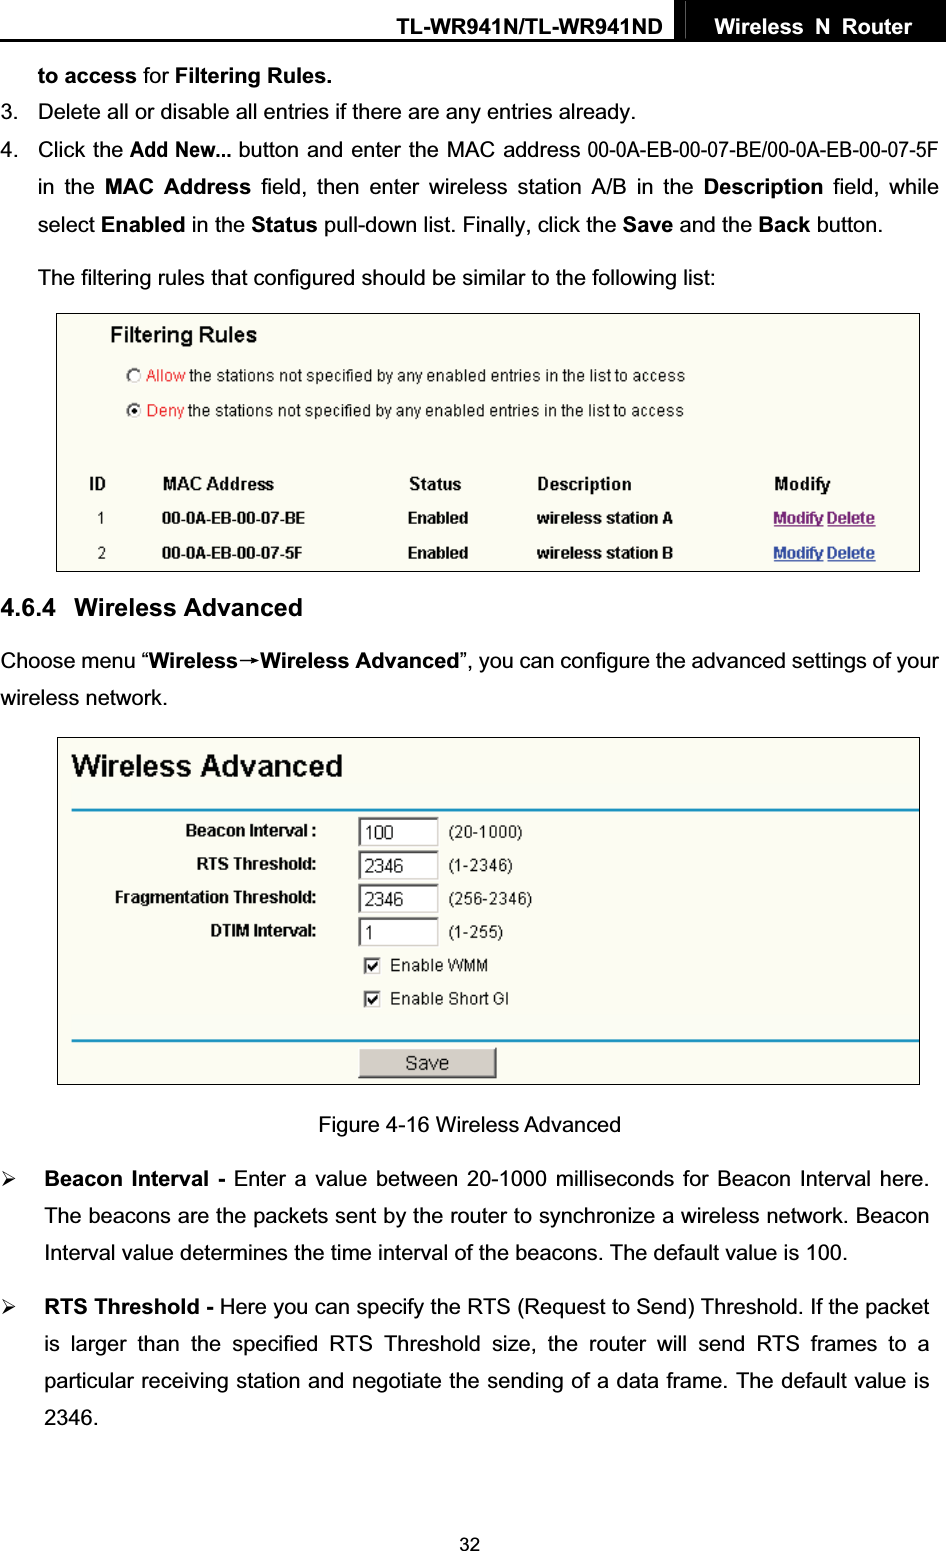 TL-WR941N/TL-WR941ND  Wireless N Router  32to access for Filtering Rules.3.  Delete all or disable all entries if there are any entries already. 4. Click theAdd New...button and enter the MAC address 00-0A-EB-00-07-BE/00-0A-EB-00-07-5F in the MAC Address field, then enter wireless station A/B in the Description field, while select Enabled in the Status pull-down list. Finally, click the Save and the Back button. The filtering rules that configured should be similar to the following list:   4.6.4 Wireless Advanced Choose menu “WirelessėWireless Advanced”, you can configure the advanced settings of your wireless network. Figure 4-16 Wireless Advanced ¾Beacon Interval - Enter a value between 20-1000 milliseconds for Beacon Interval here. The beacons are the packets sent by the router to synchronize a wireless network. Beacon Interval value determines the time interval of the beacons. The default value is 100.   ¾RTS Threshold - Here you can specify the RTS (Request to Send) Threshold. If the packet is larger than the specified RTS Threshold size, the router will send RTS frames to a particular receiving station and negotiate the sending of a data frame. The default value is 2346.